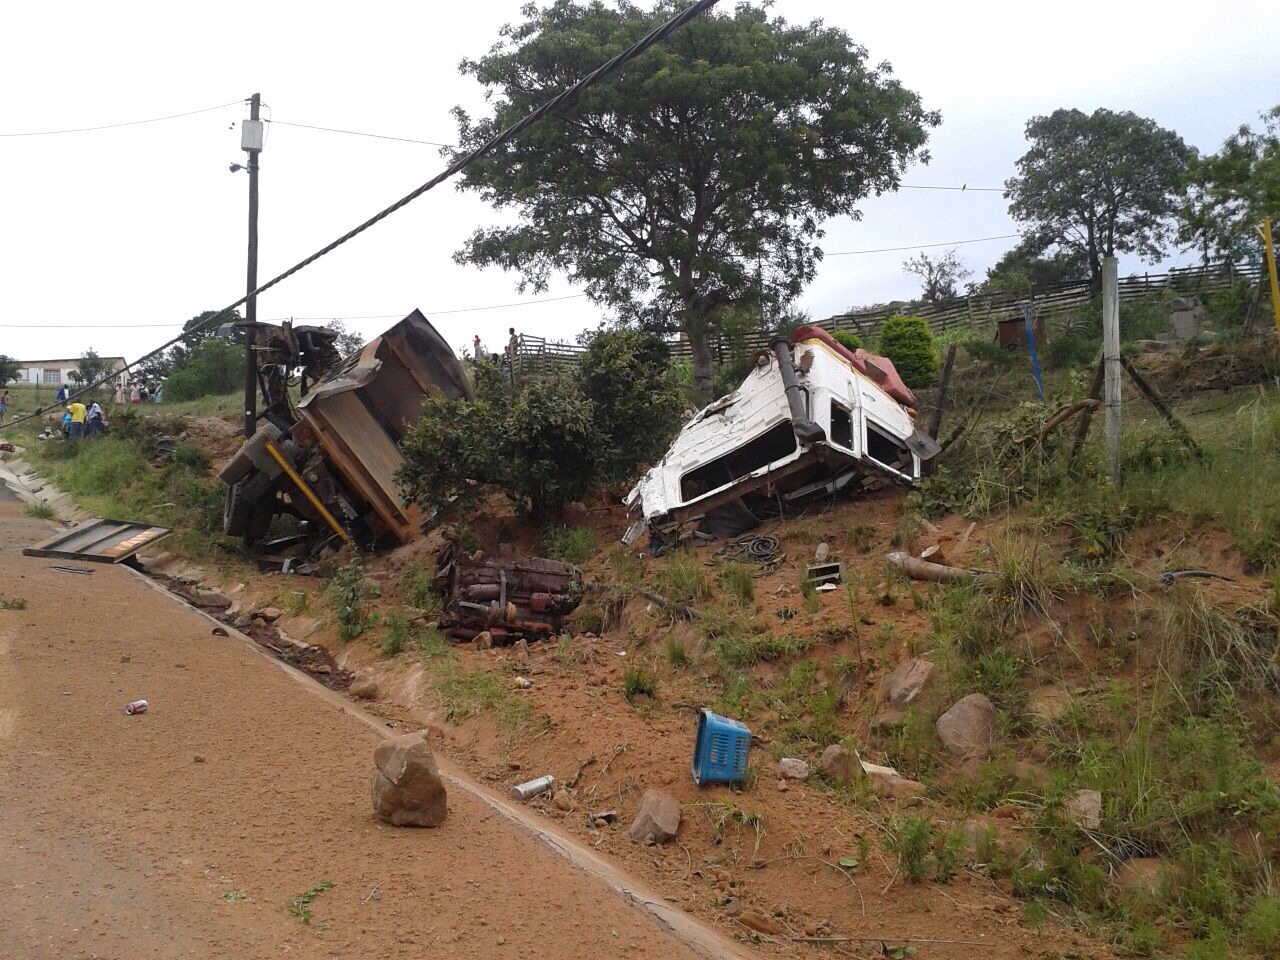 Earlier this morning paramedics responded to the Molweni area in Durban where a tipper truck carrying sand had crashed